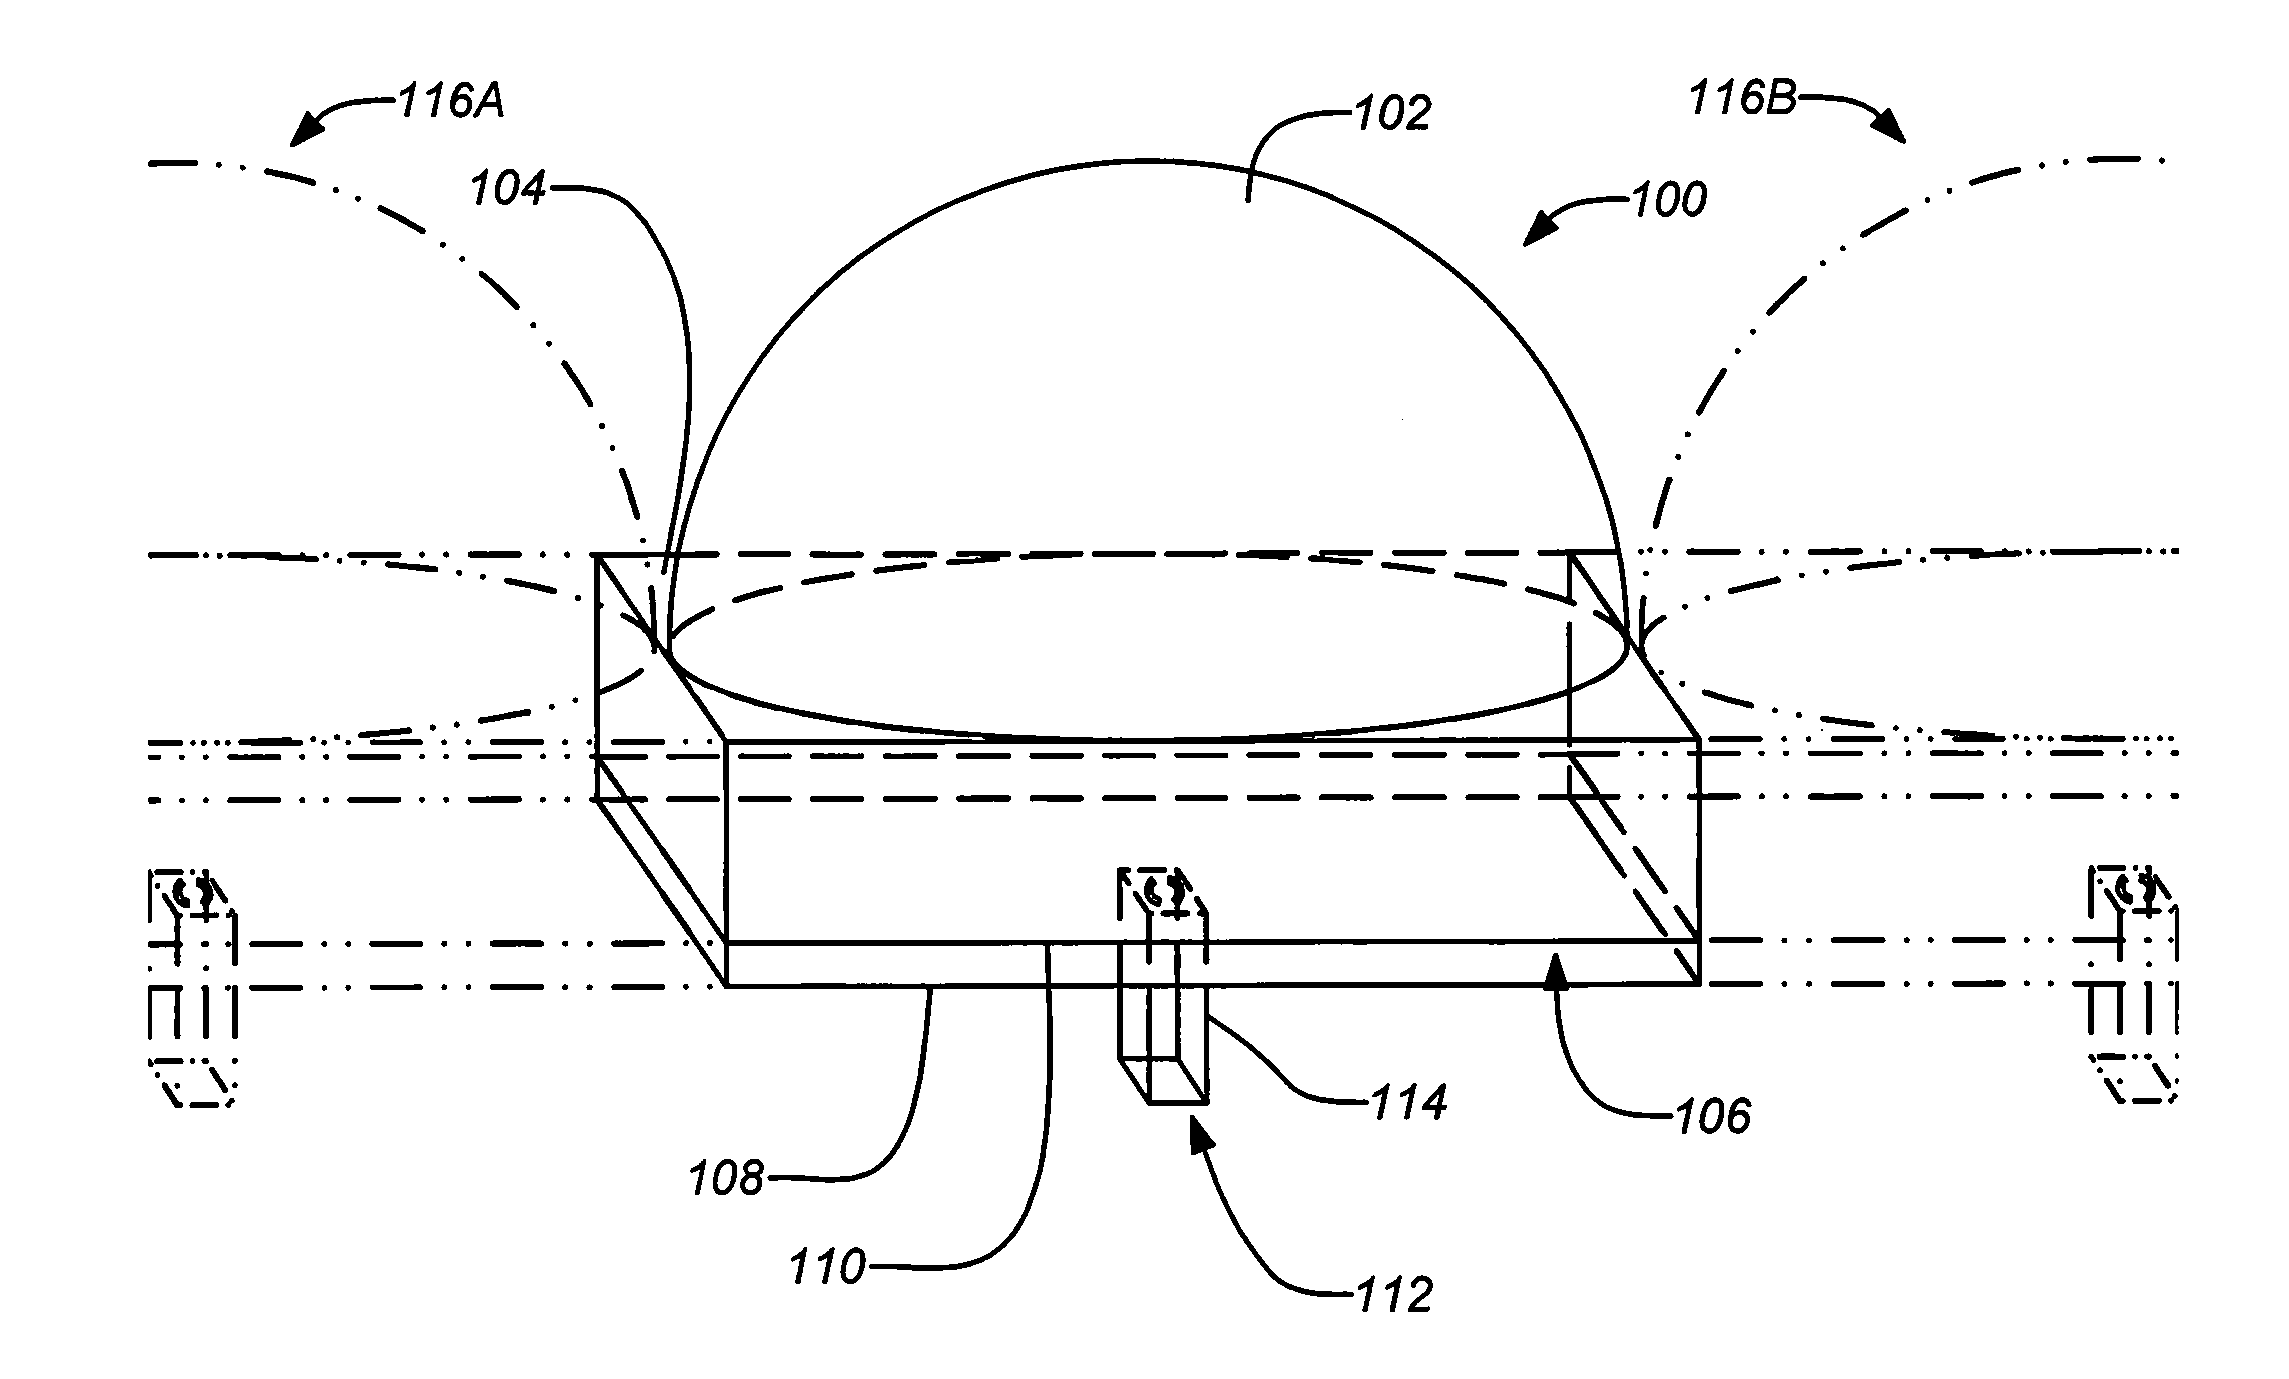 Dielectric covered planar antennas